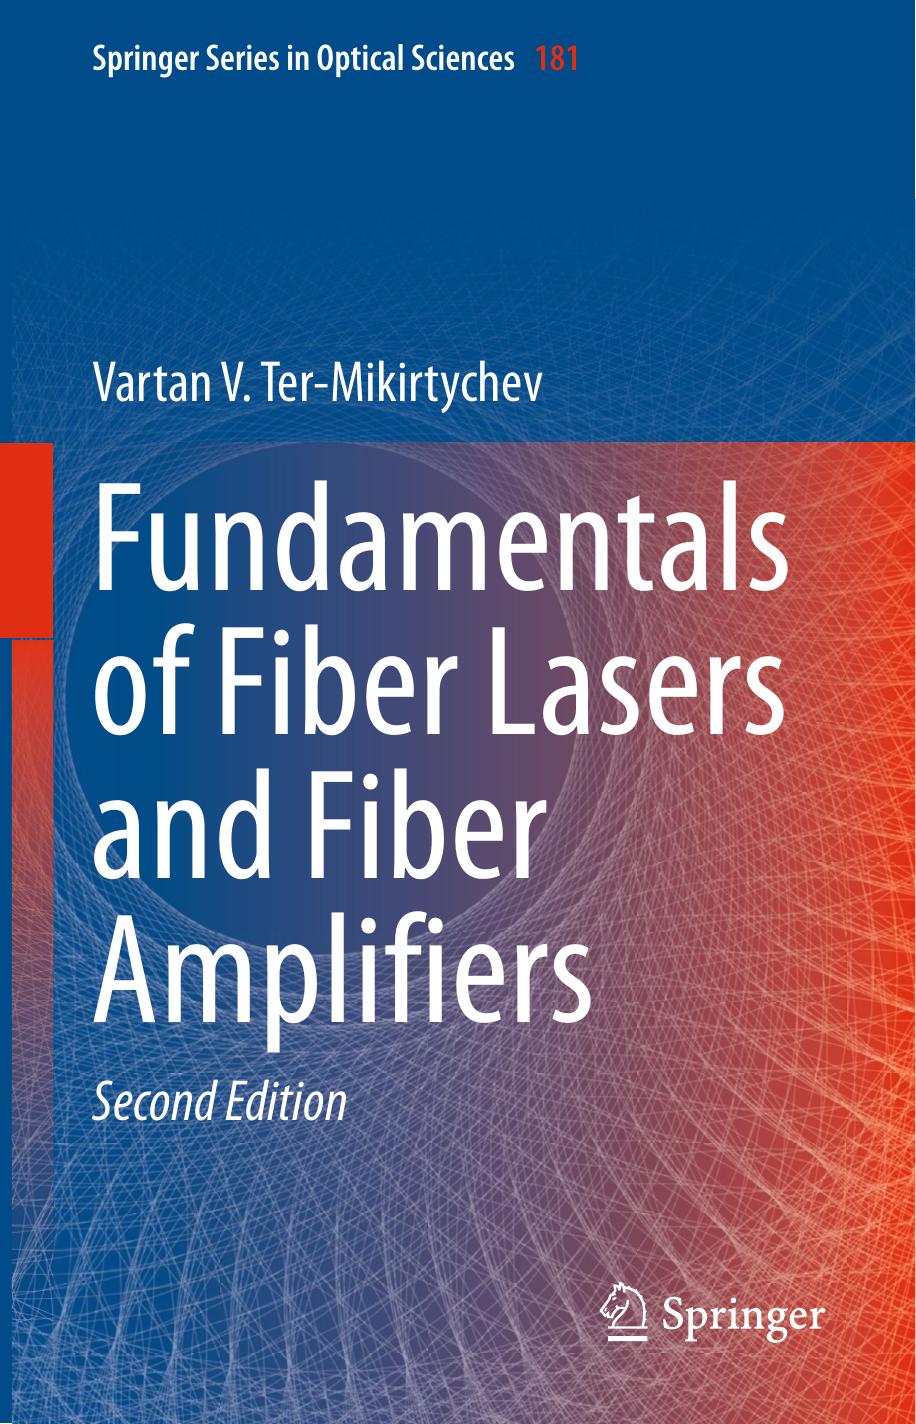 Fundamentals of Fiber Lasers and Fiber Amplifiers by Vartan V. Ter-Mikirtychev